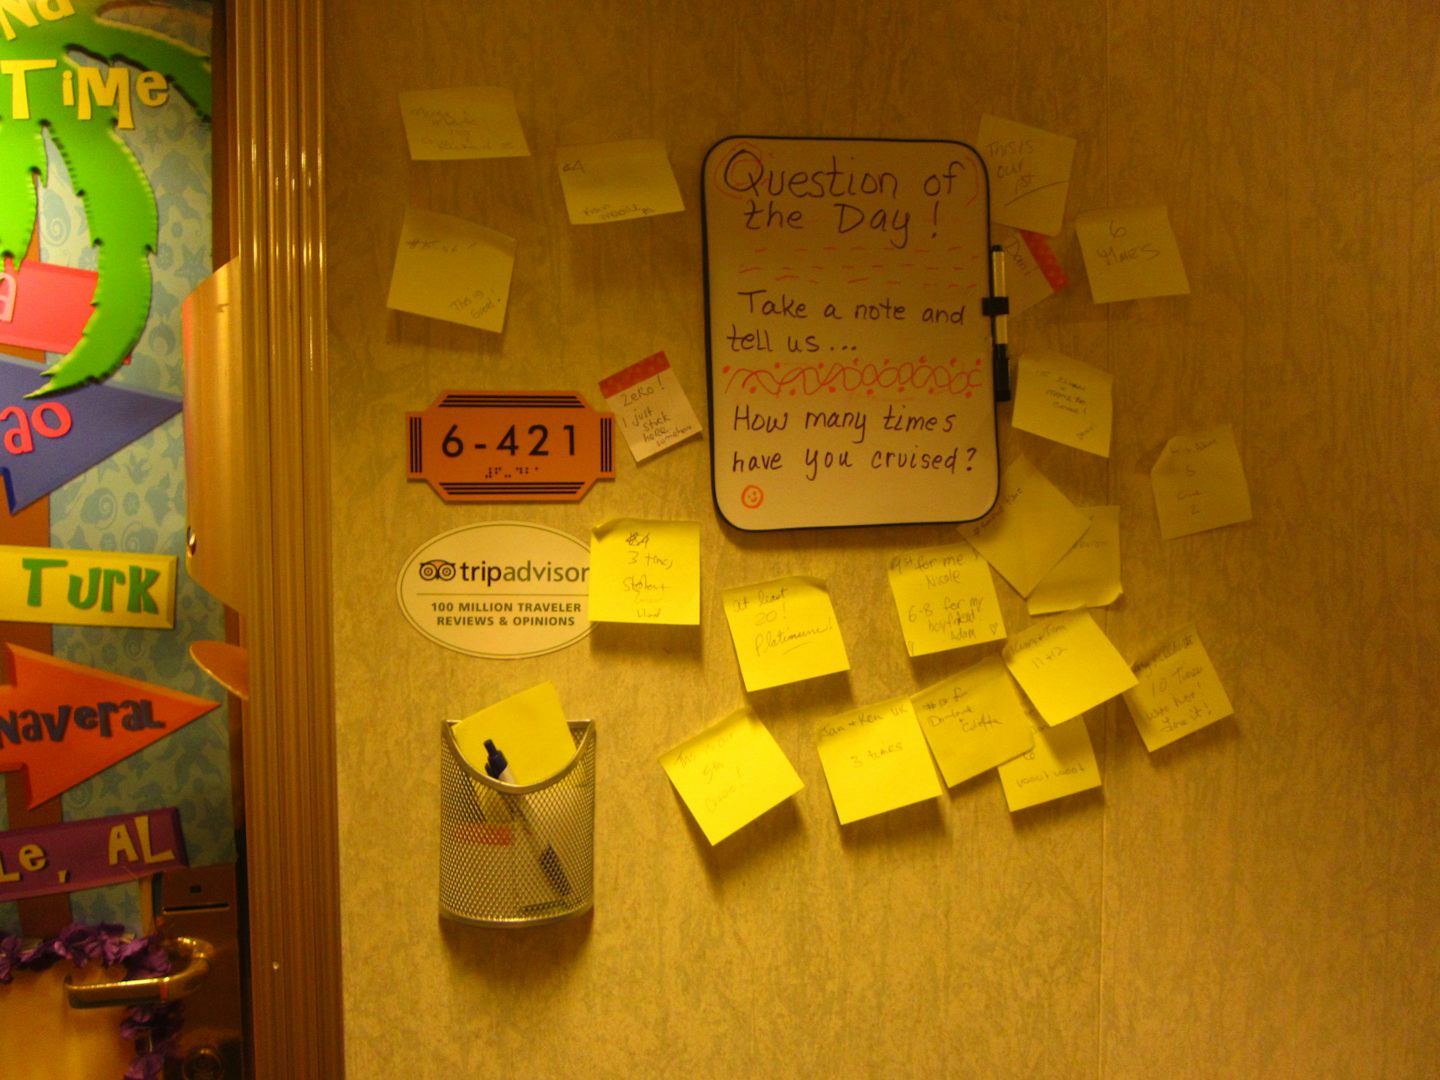 Our Door - Question of the day
We make our own fun ;)